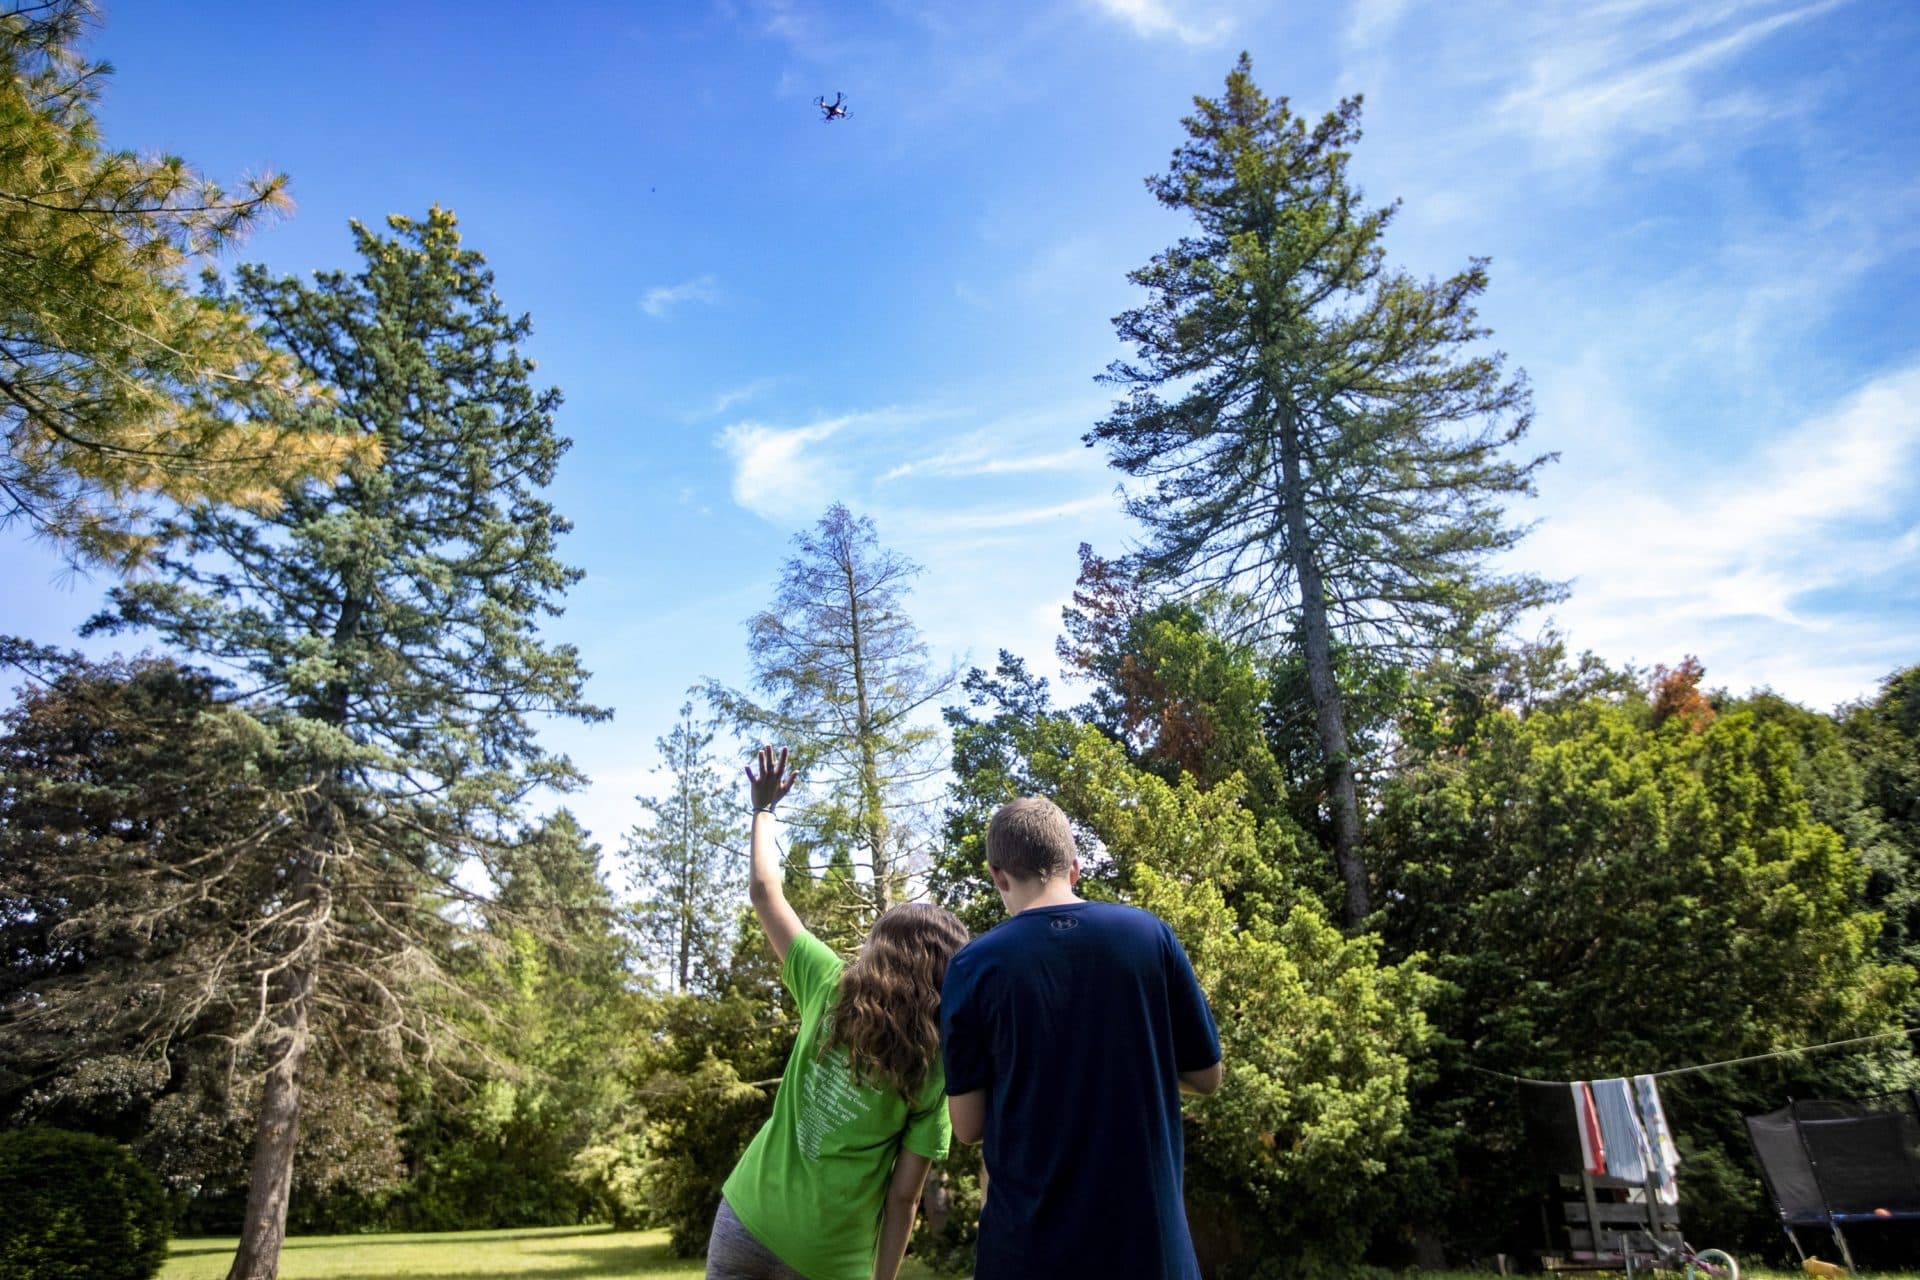 Emily, 13, waves at the drone that her brother Charlie, 12, is flying high above their heads in the backyard of their home in West Springfield. (Jesse Costa/WBUR)